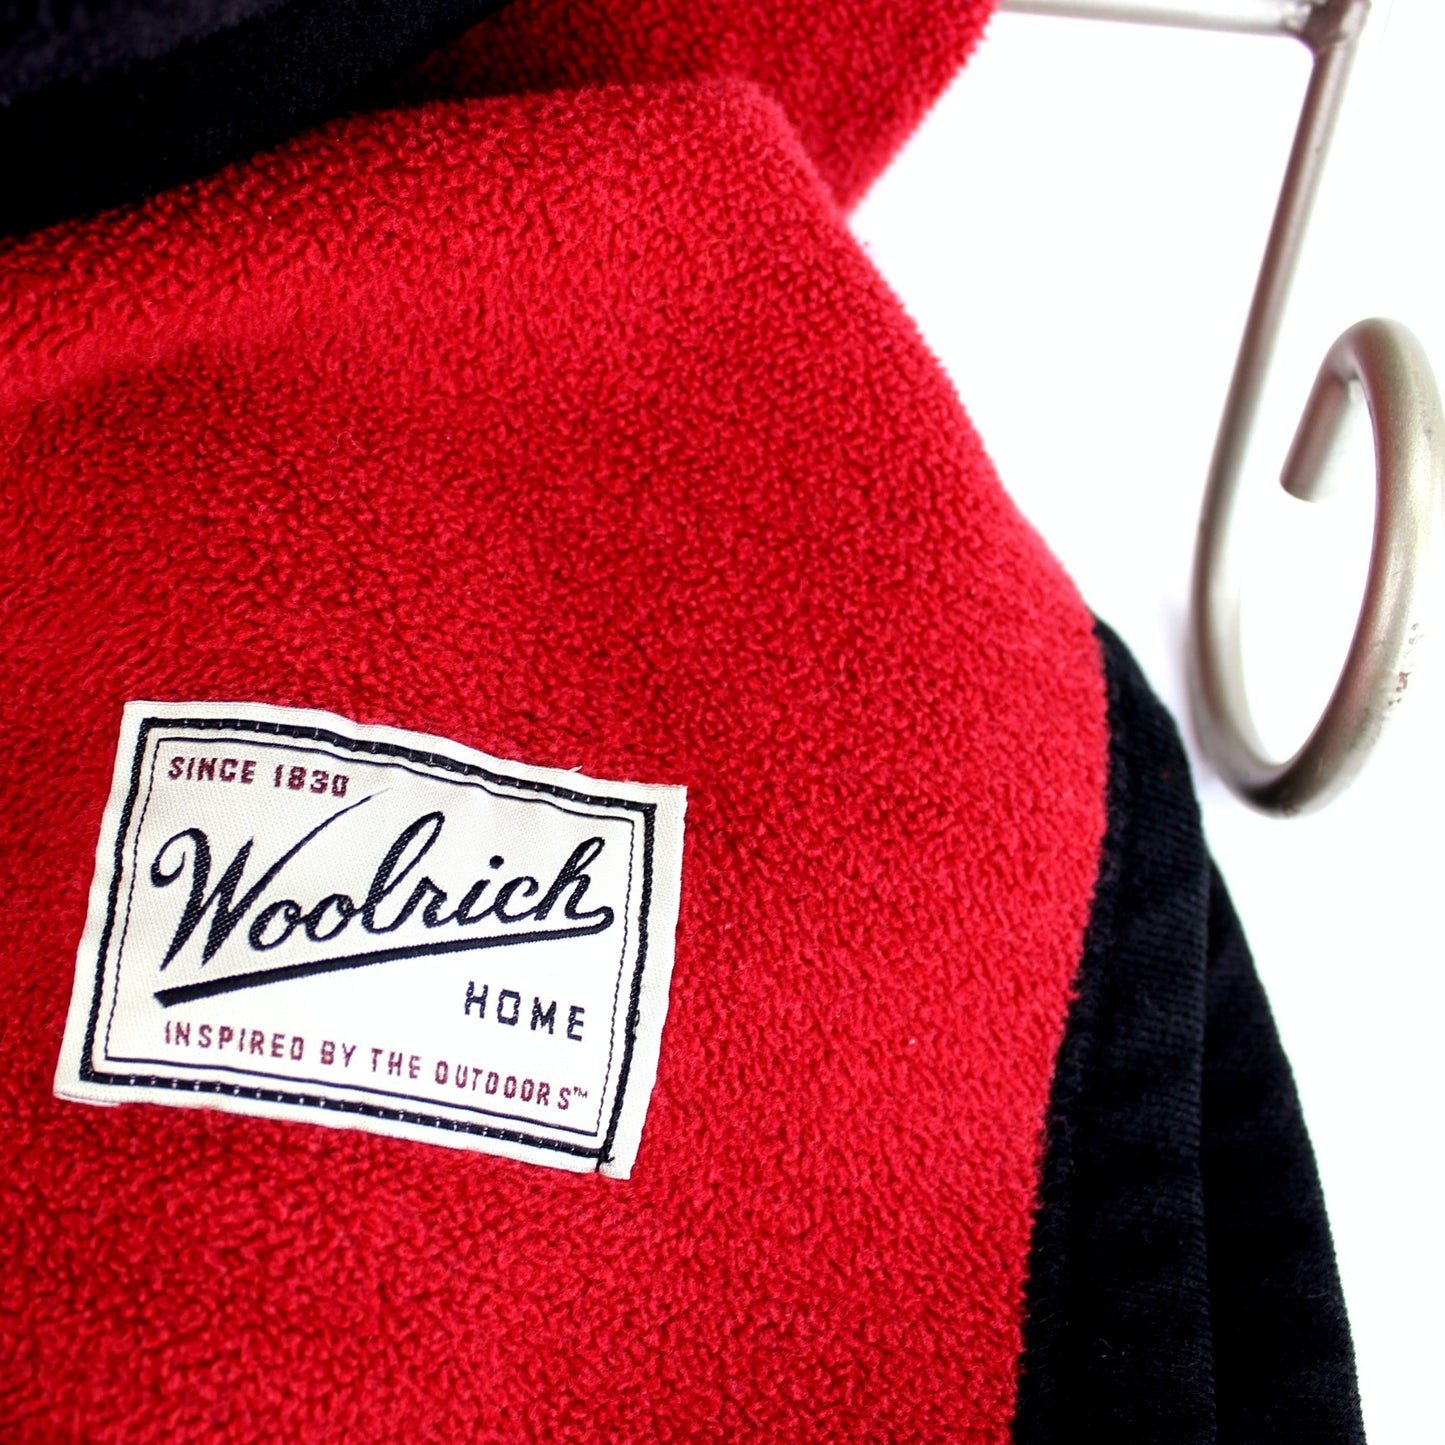 Woolrich Home Polyester Blanket Black Red Washable Large 80" X 74" original tag from woorich home